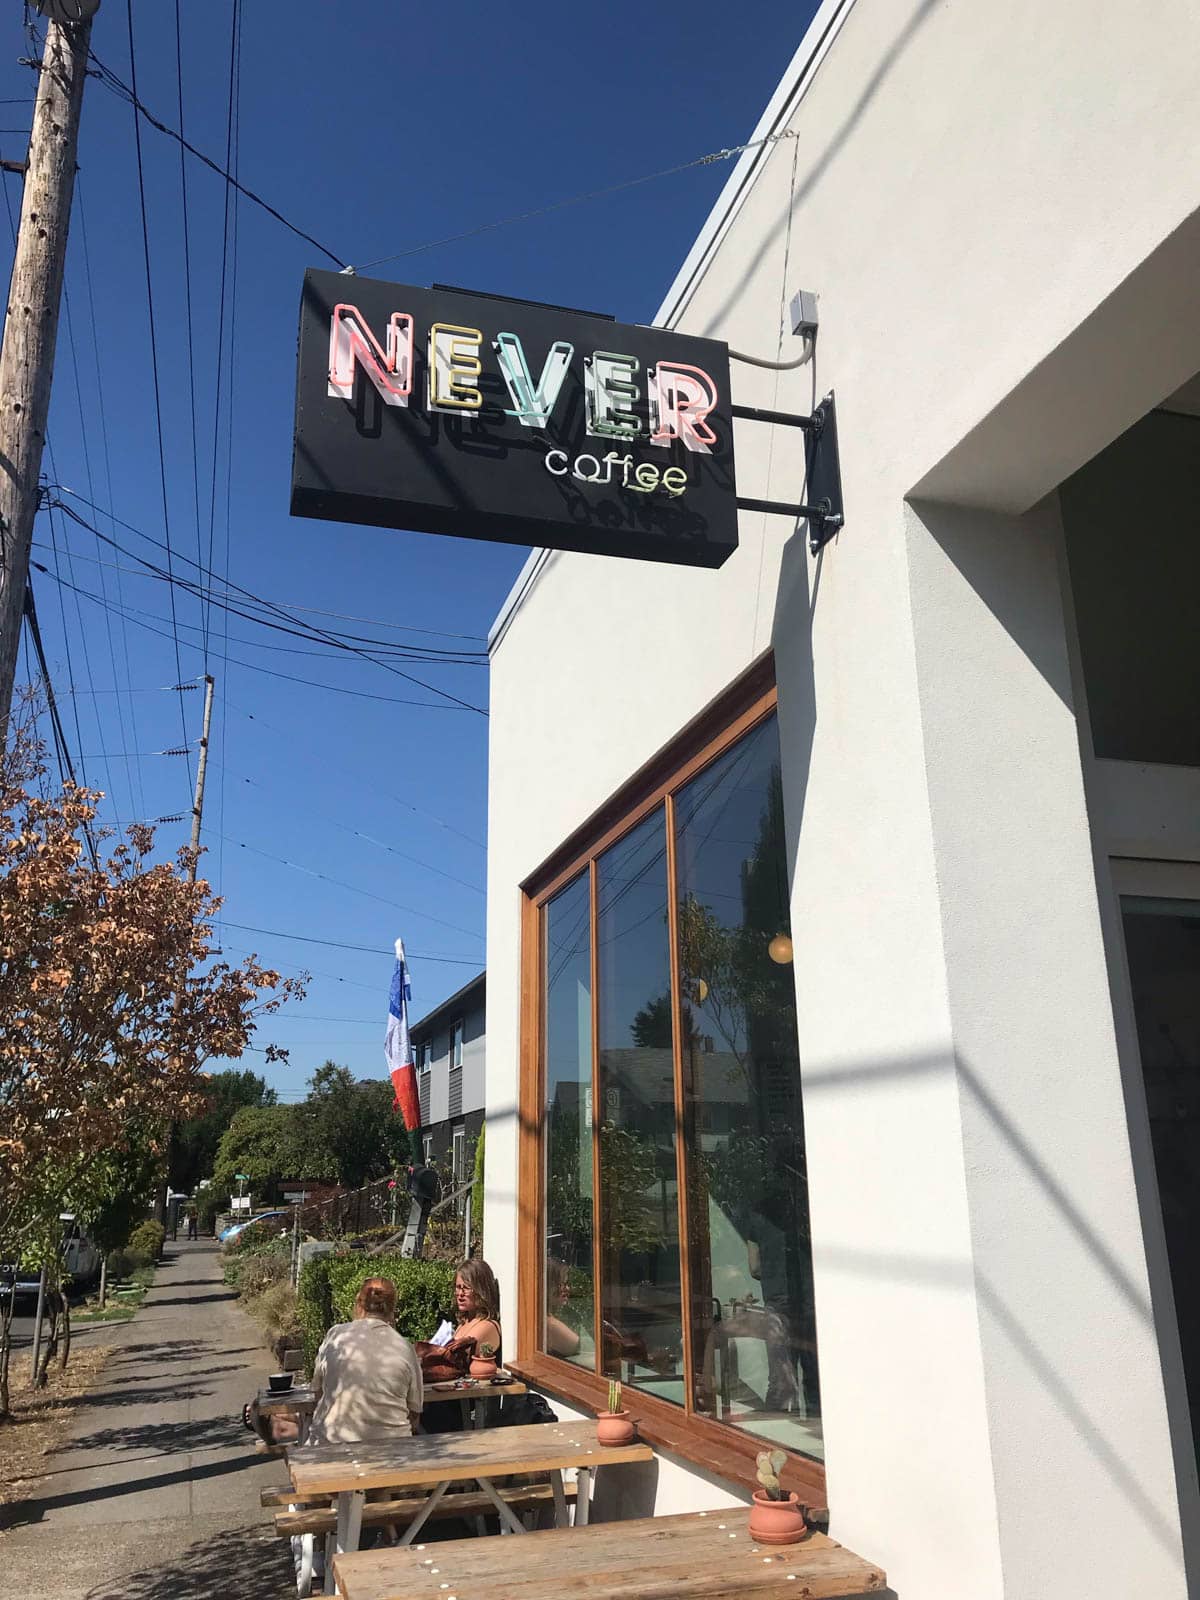 The front of a coffee shop, with a neon sign reading “Never coffee”. Two people sit outside the coffee shop at a wooden table.